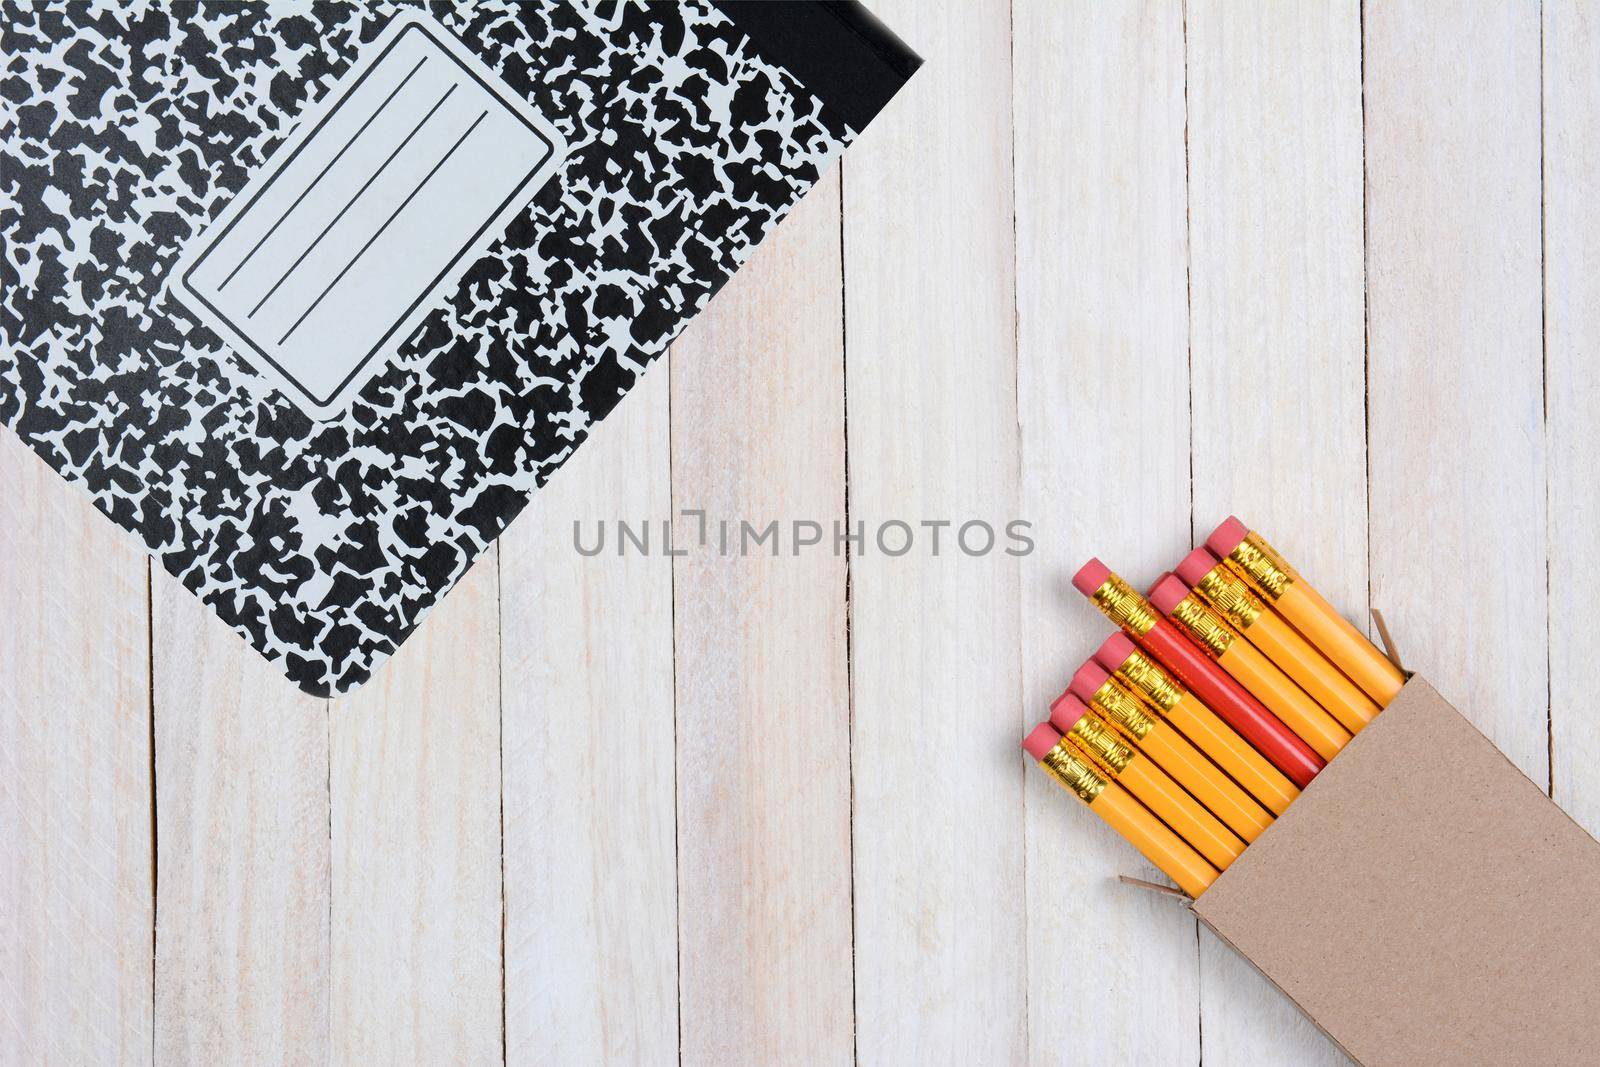 Pencils and Composition Book on Wood Surface by sCukrov